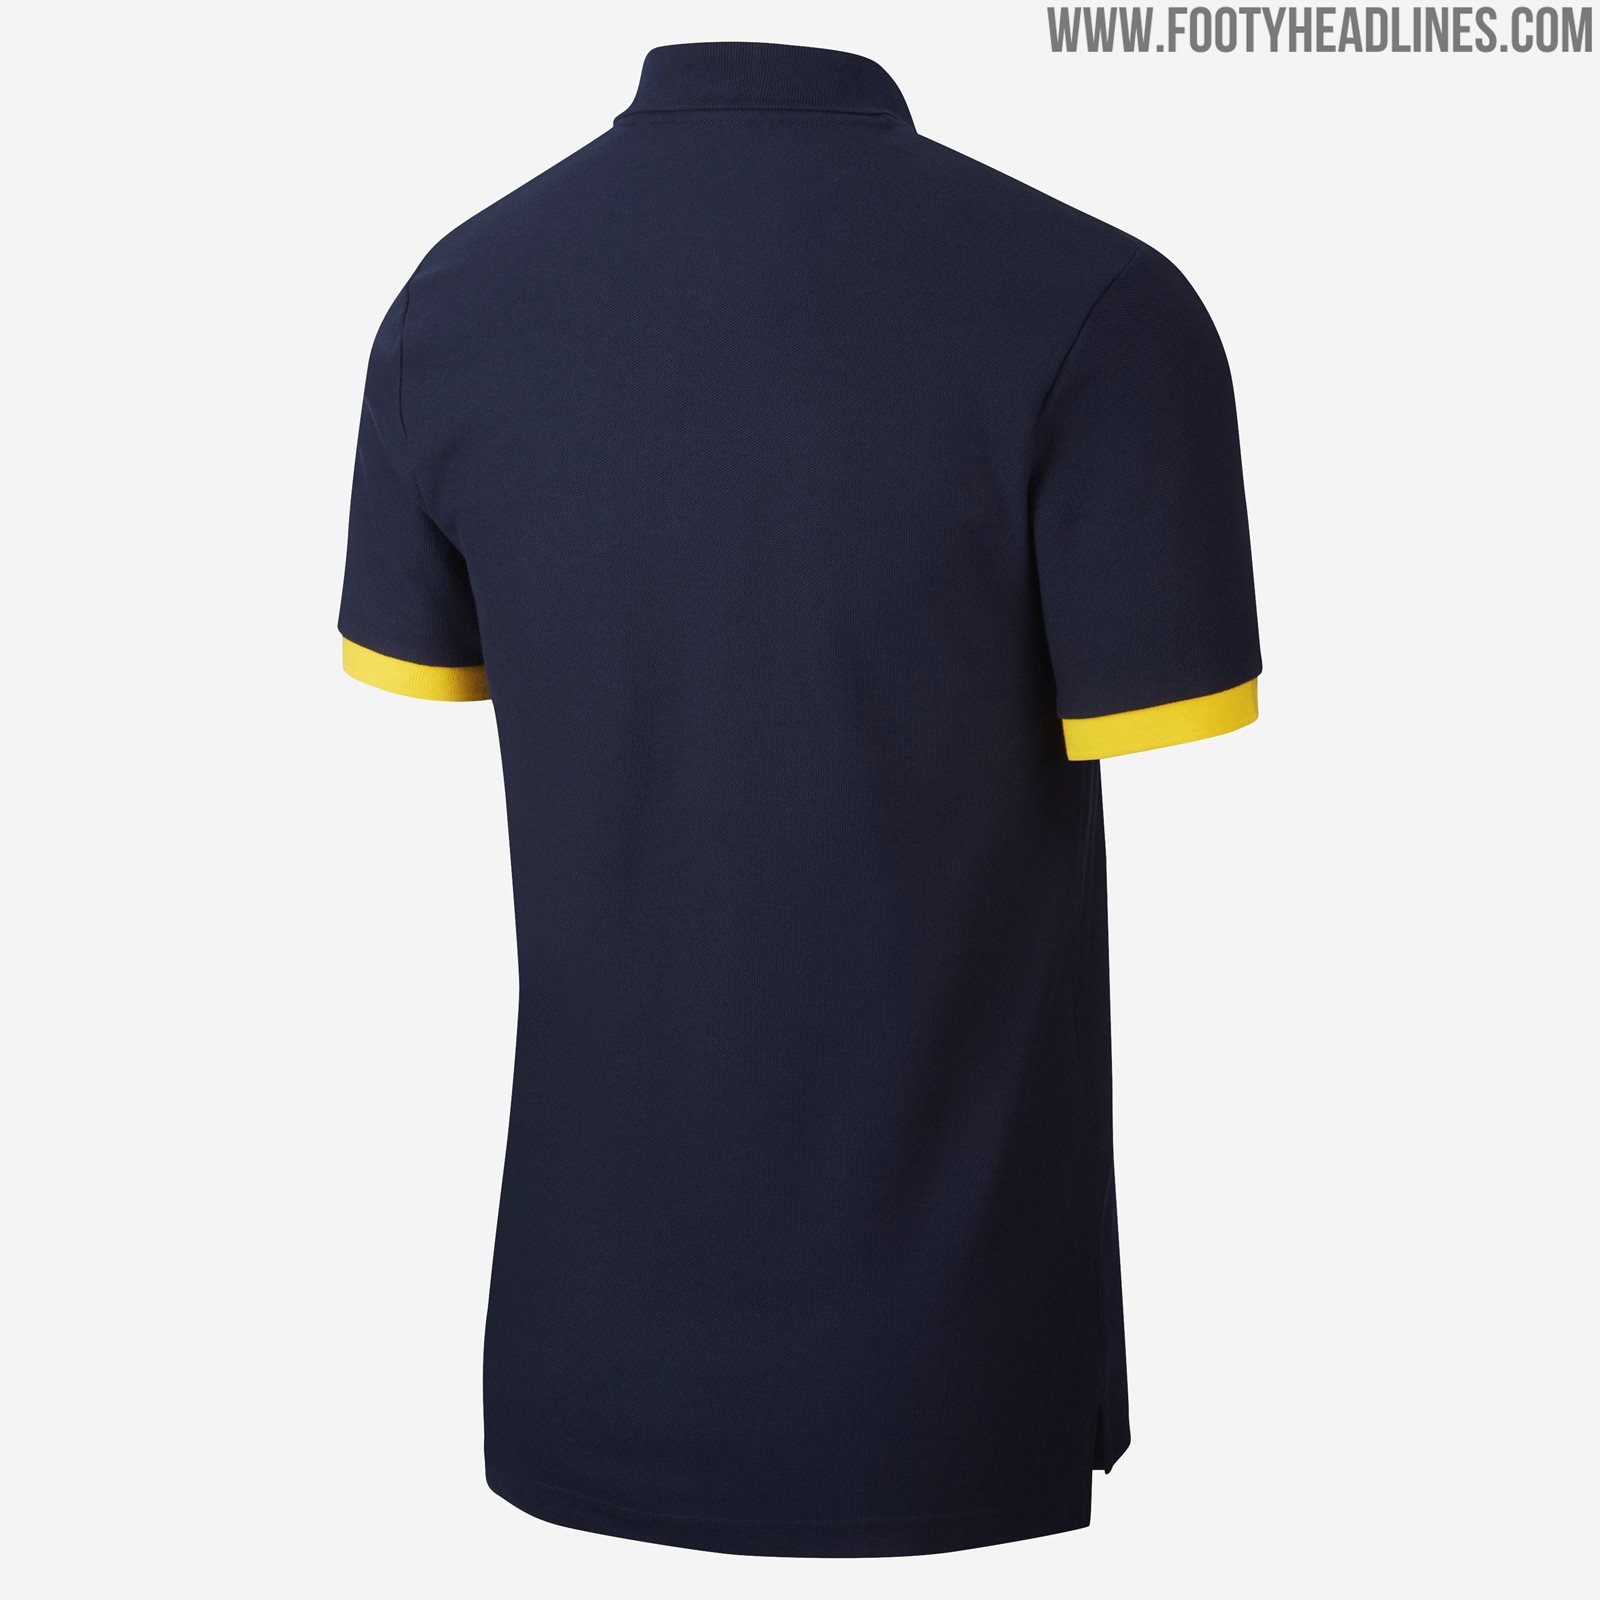 Cup Kit Inspired - Chelsea 2020 Training Kits & Lifestyle Collection ...